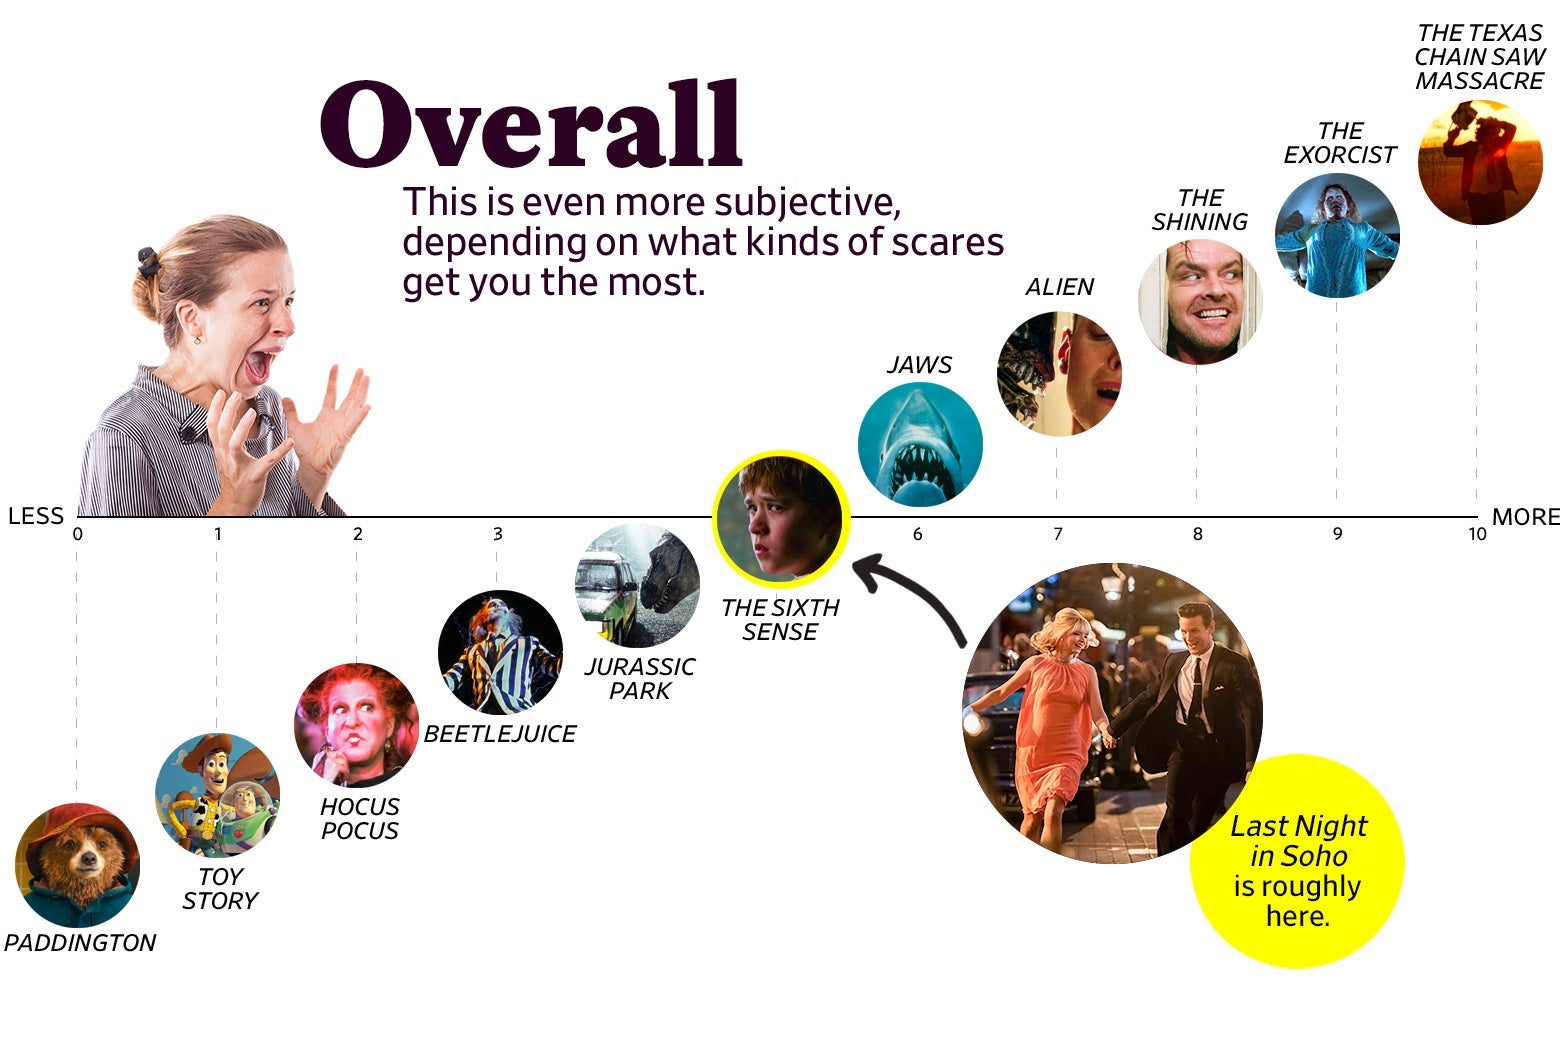 A chart titled “Overall: This is even more subjective, depending on what kinds of scares get you the most” shows that Last Night in Soho ranks as a 5 overall, roughly the same as The Sixth Sense. The scale ranges from Paddington (0) to the original Texas Chain Saw Massacre (10). 